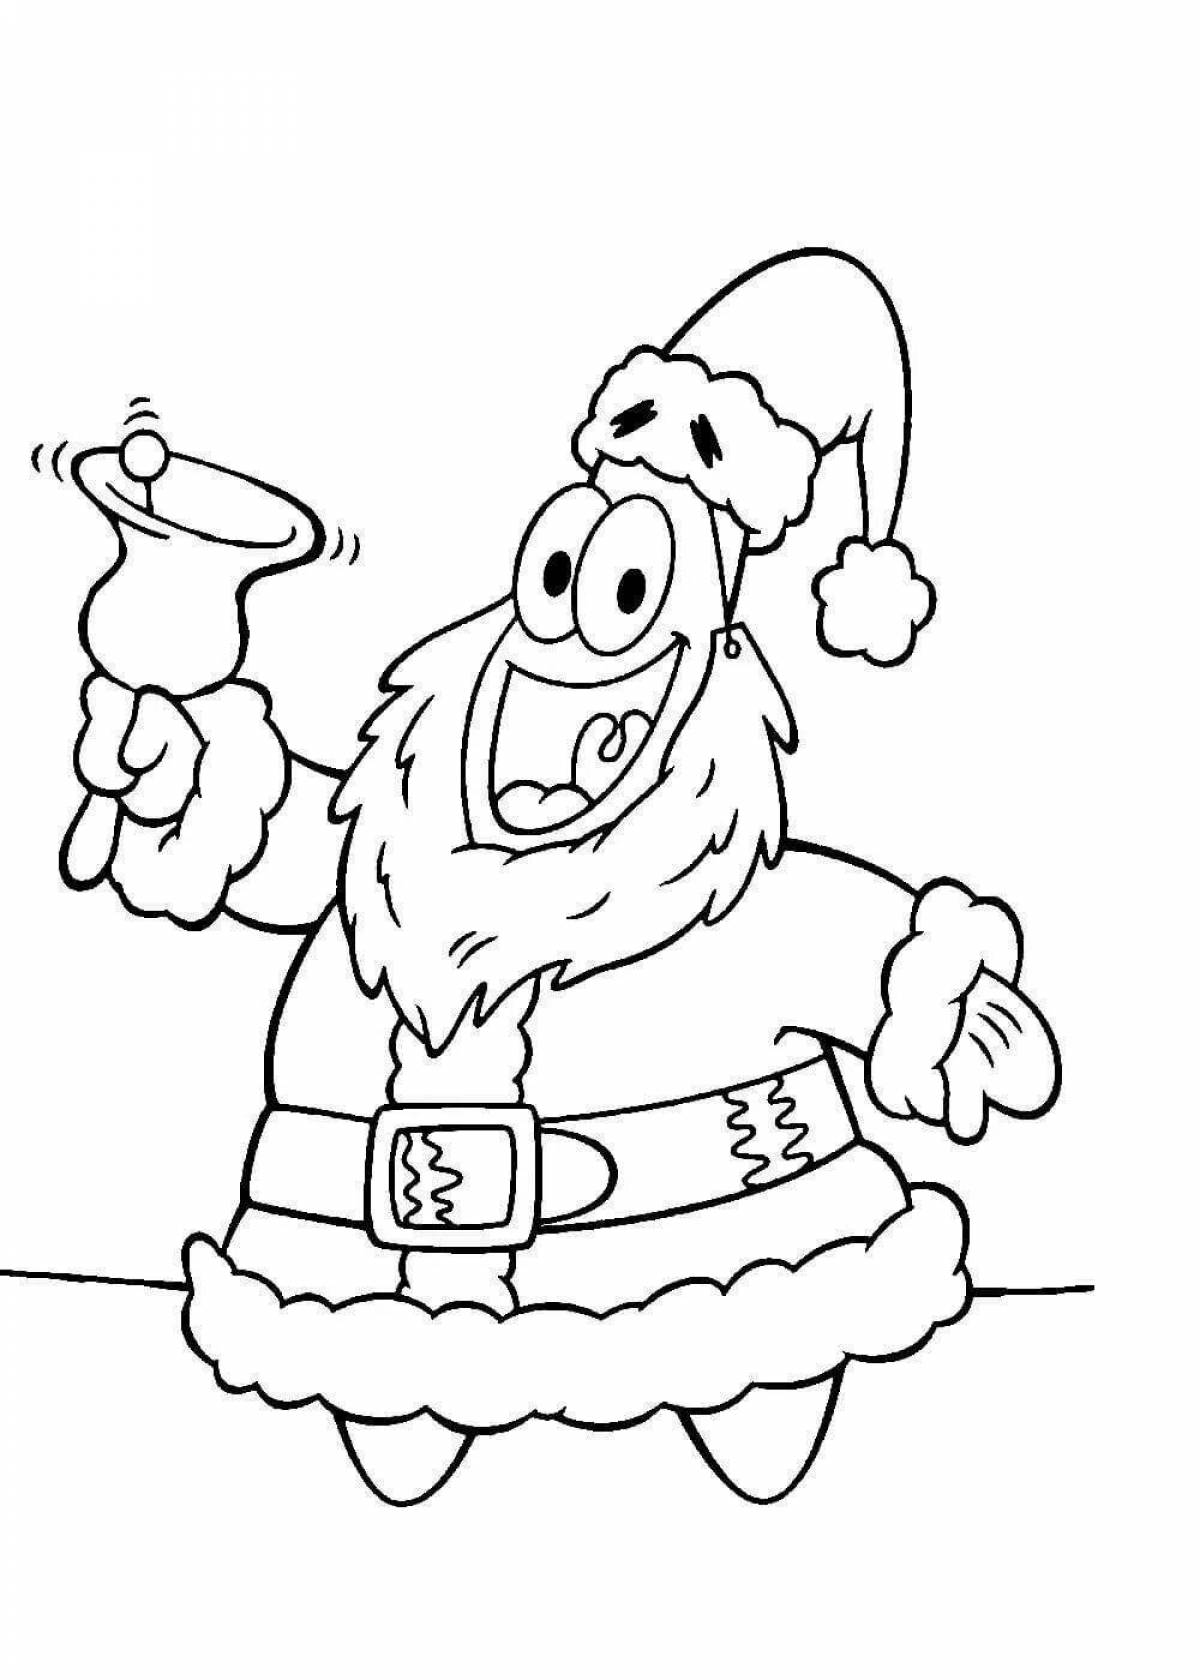 Colorful cool Christmas coloring book